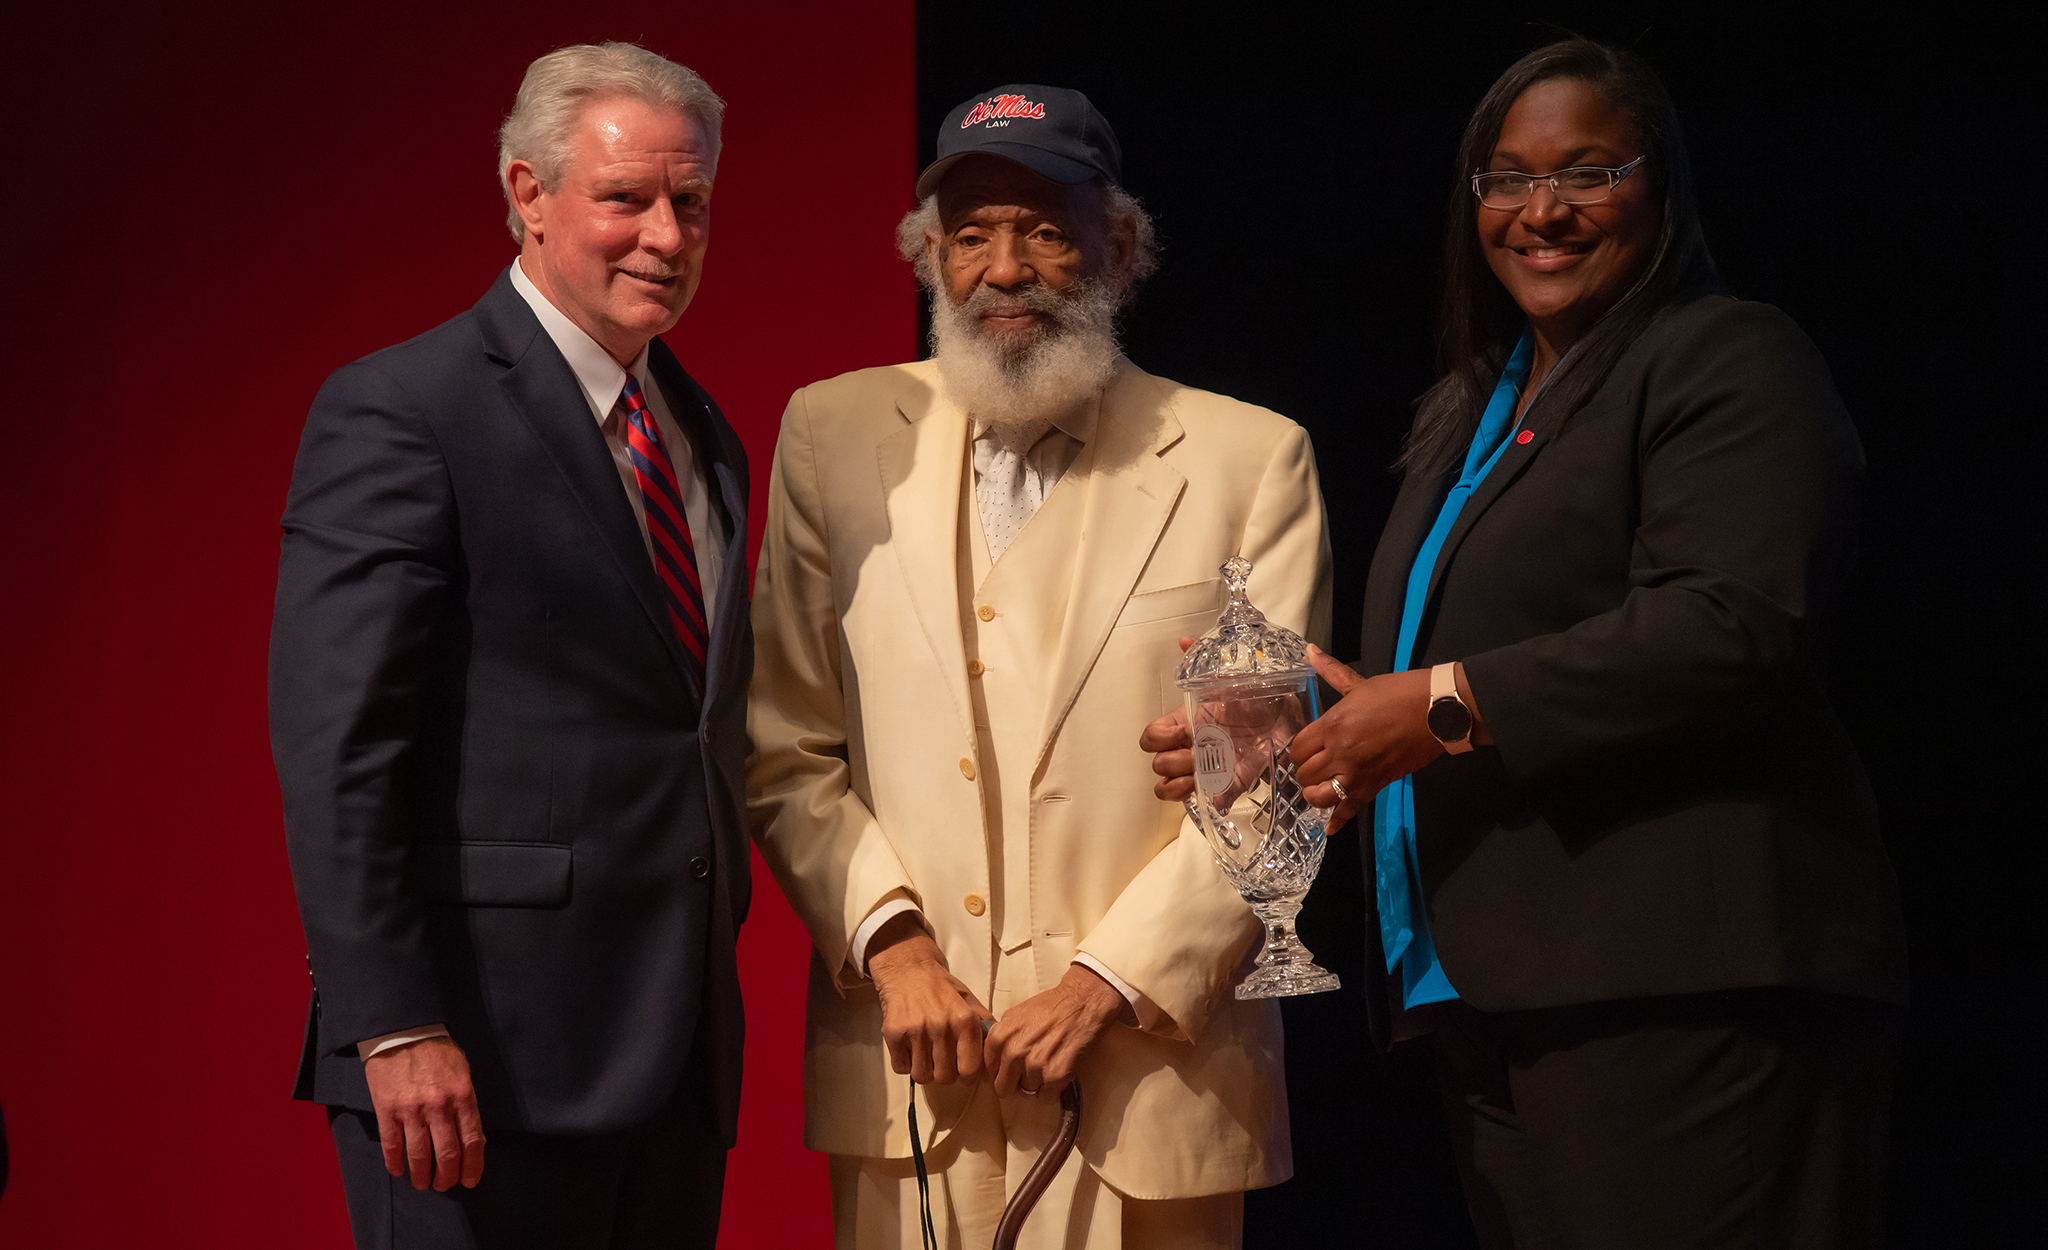 Chancellor Glenn Boyce (left) and Shawnboda Mead (right), UM vice chancellor for diversity and community engagement, present James Meredith with the Mississippi Humanitarian Award on Wednesday (Sept. 28) at the Gertrude C. Ford Center for the Performing Arts. The honor is one of the university’s most distinguished awards. Photo by Kevin Bain/Ole Miss Digital Imaging Services